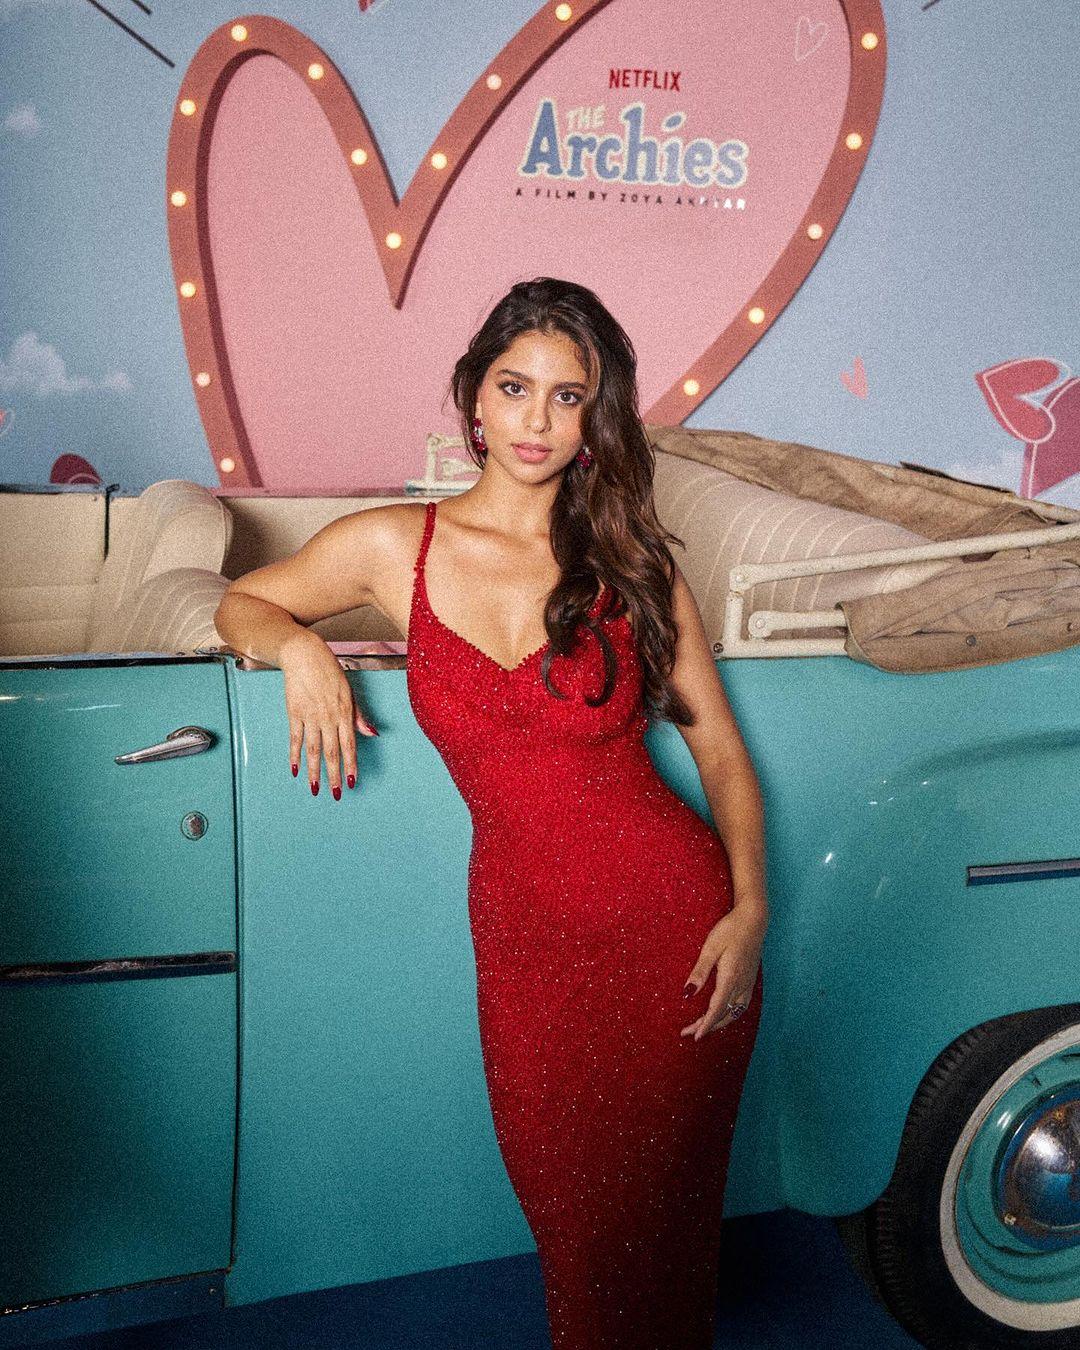 In true Veronica fashion, Suhana Khan stole the night in this figure-hugging sequin red dress. The starlet. Suhana indeed marked her red letter day in style